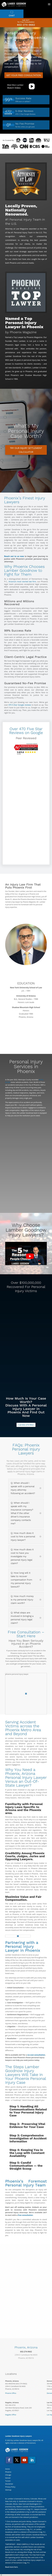 The Lamber-Goodnow Injury Law Team at Fennemore Craig, P.C. - Nogales AZ Lawyers